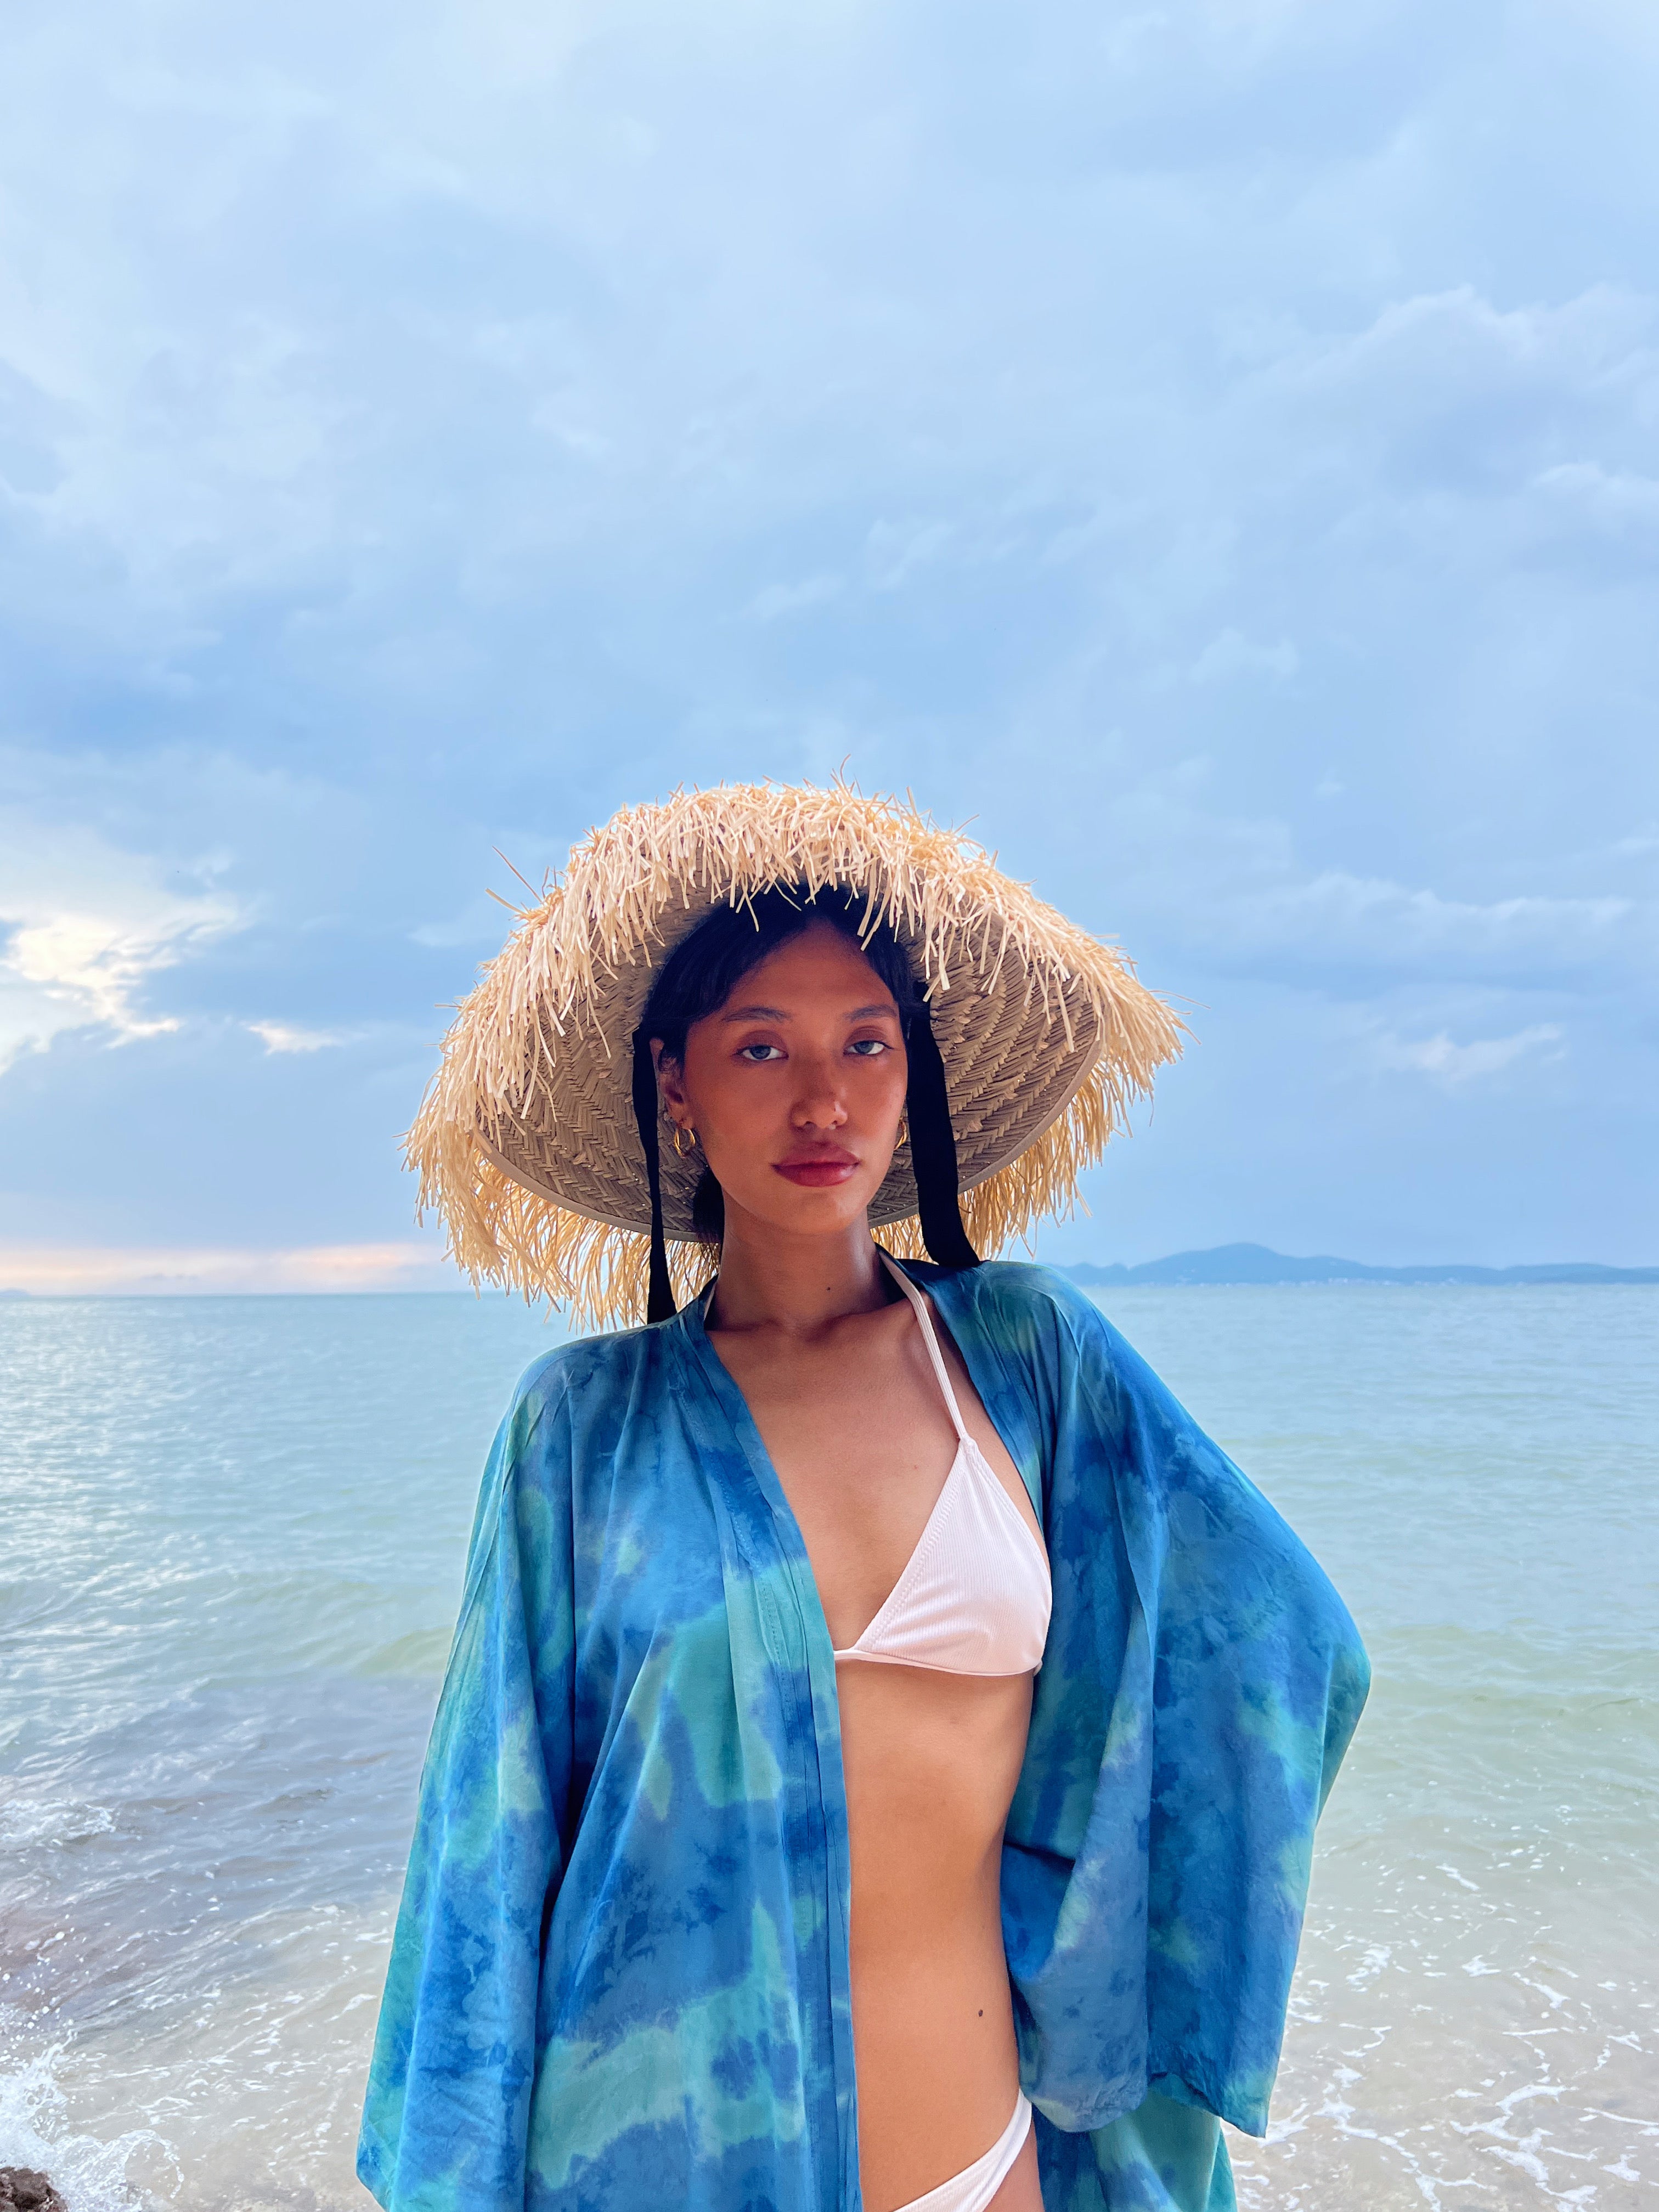 Shop Blue Long Tie dye kimono robe, boho beach coverup, perfect for vacation or everyday wear, this product is handmade with love by Coco de Chom.